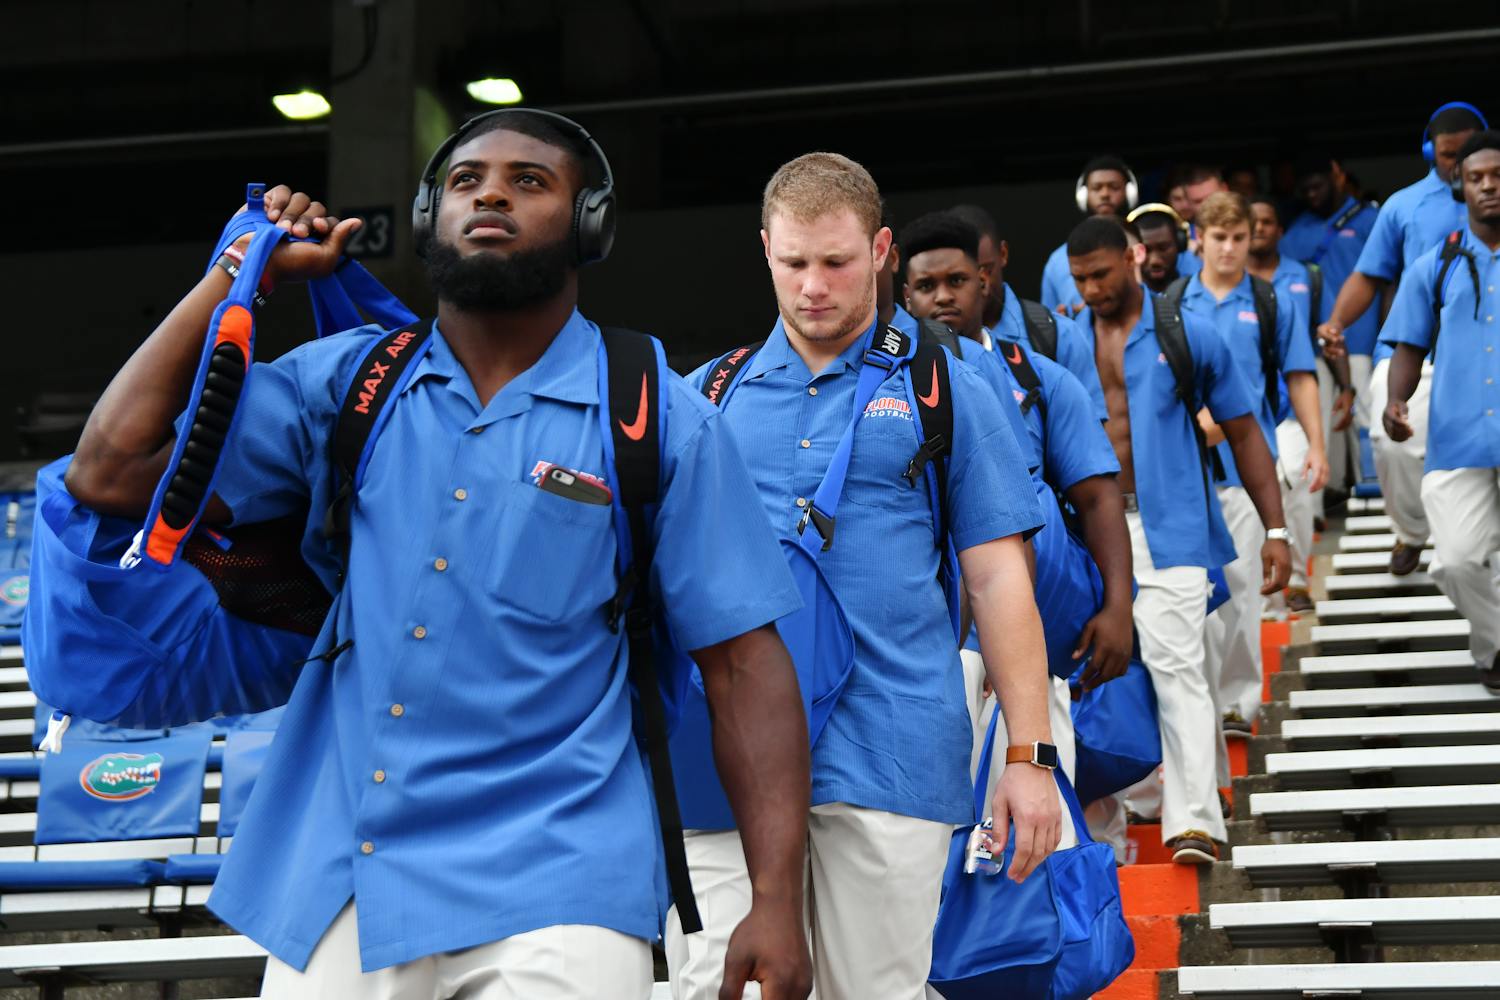 From left: Jarrad Davis, Steven Stipe and the rest of Florida's football team descend into The Swamp prior to UF's 32-0 win over North Texas on Sept. 17, 2016.